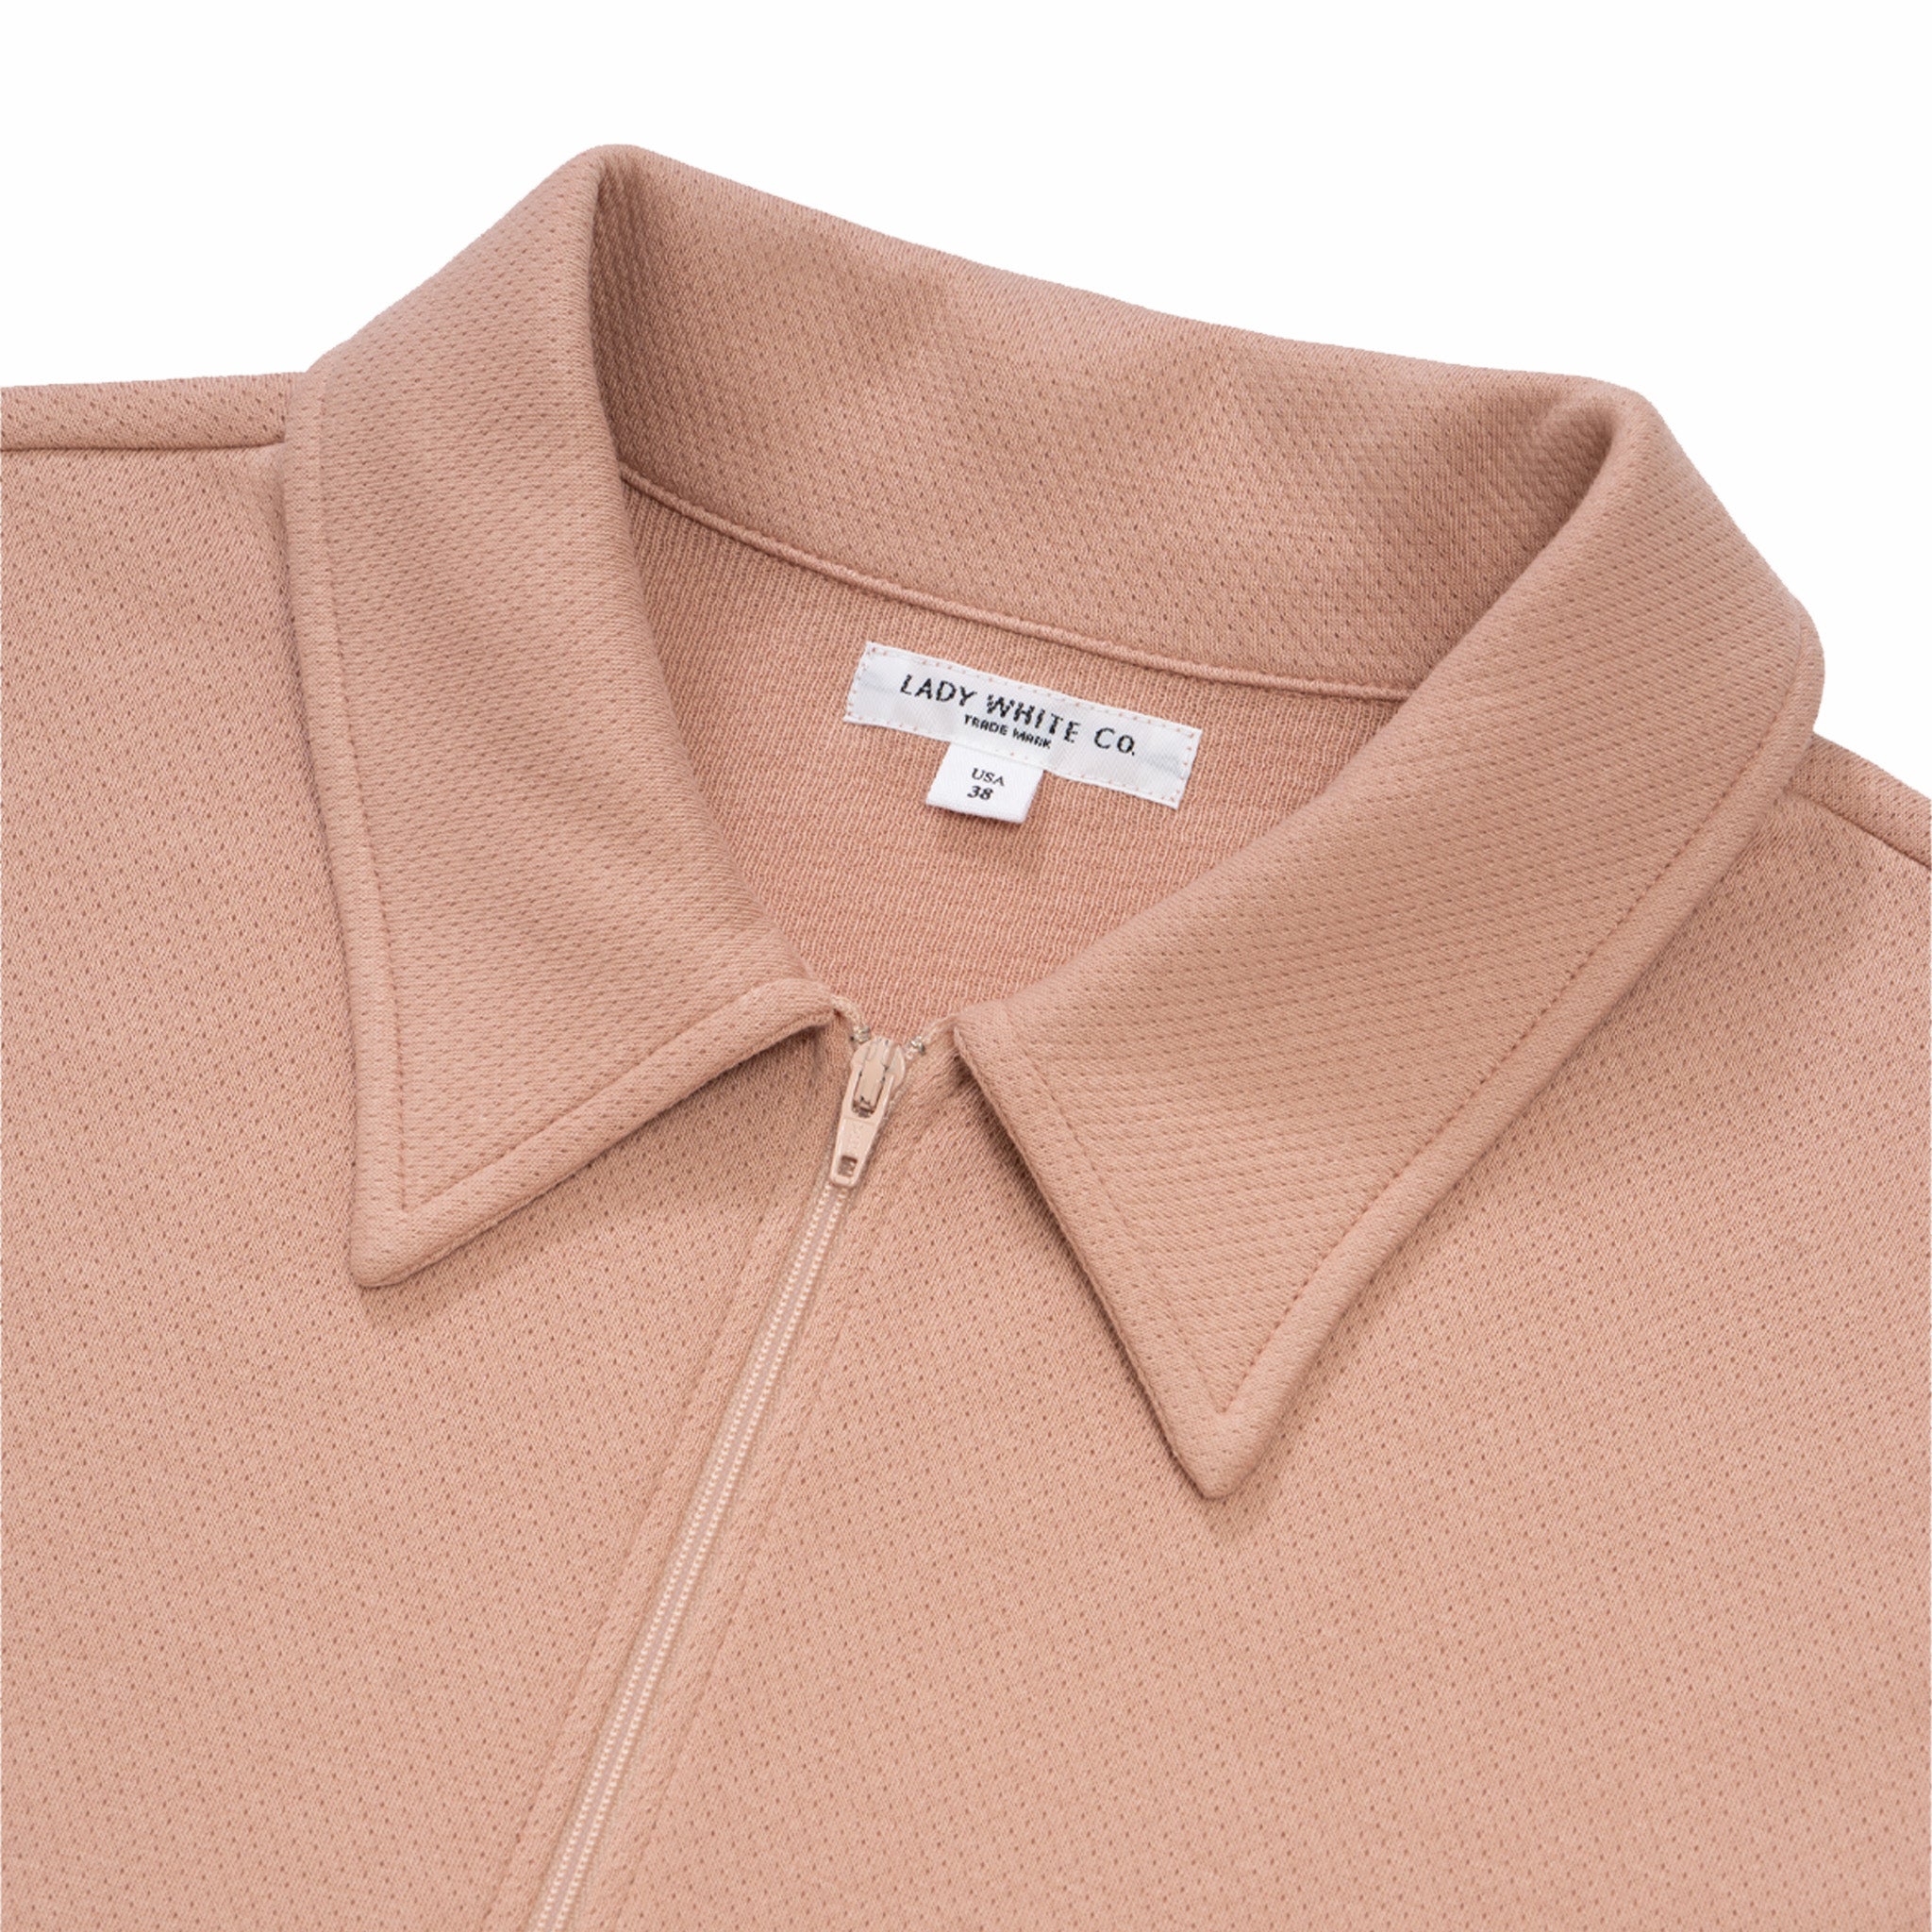 Lady White Co. Half-Zip Polo (Pink Glass) - August Shop